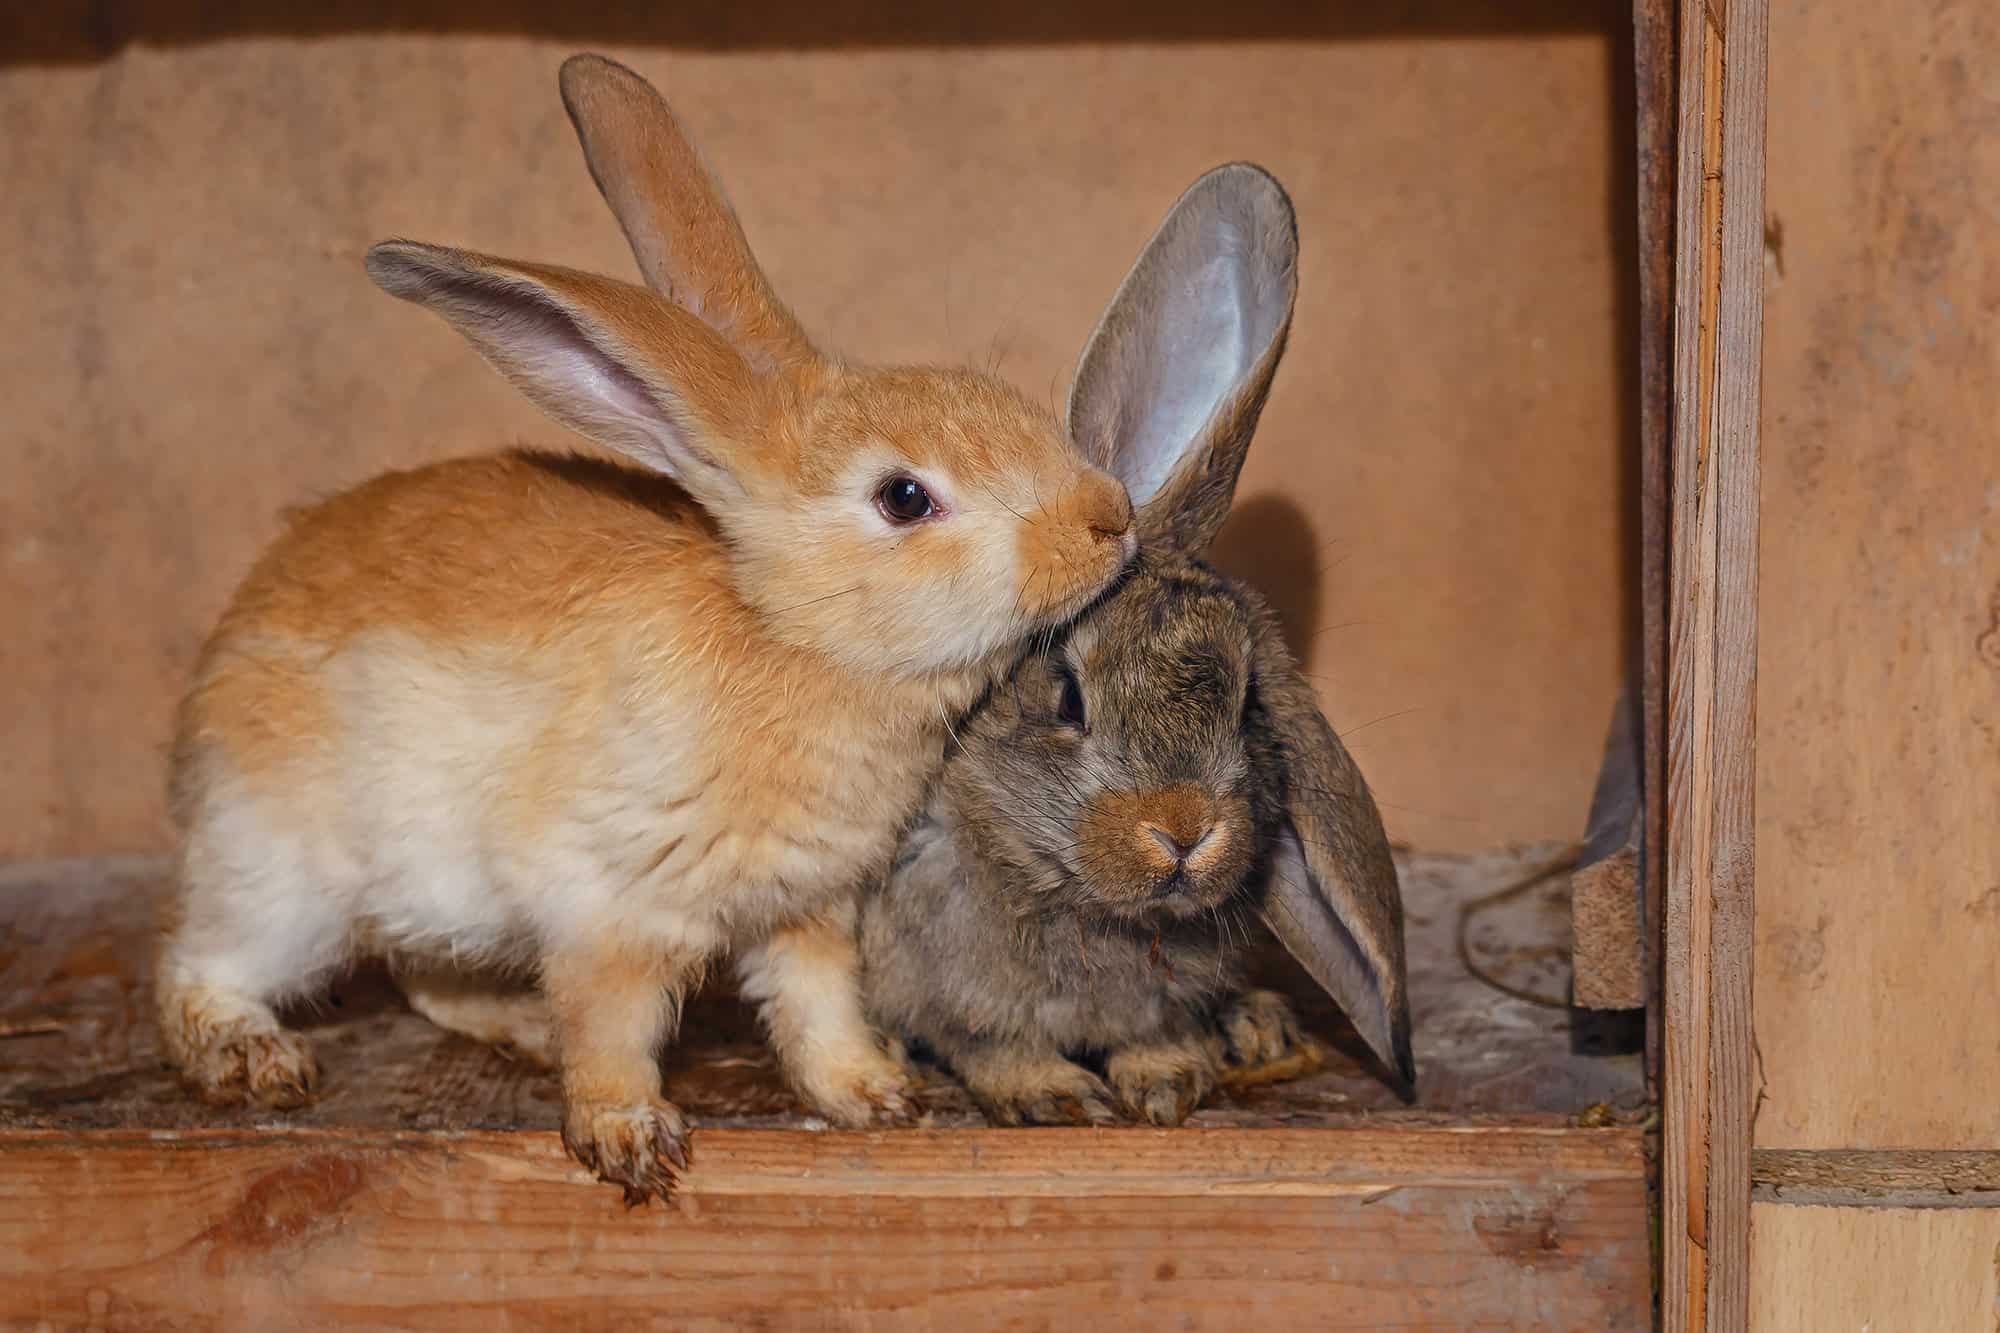 brown and grey rabbits nudging each other.